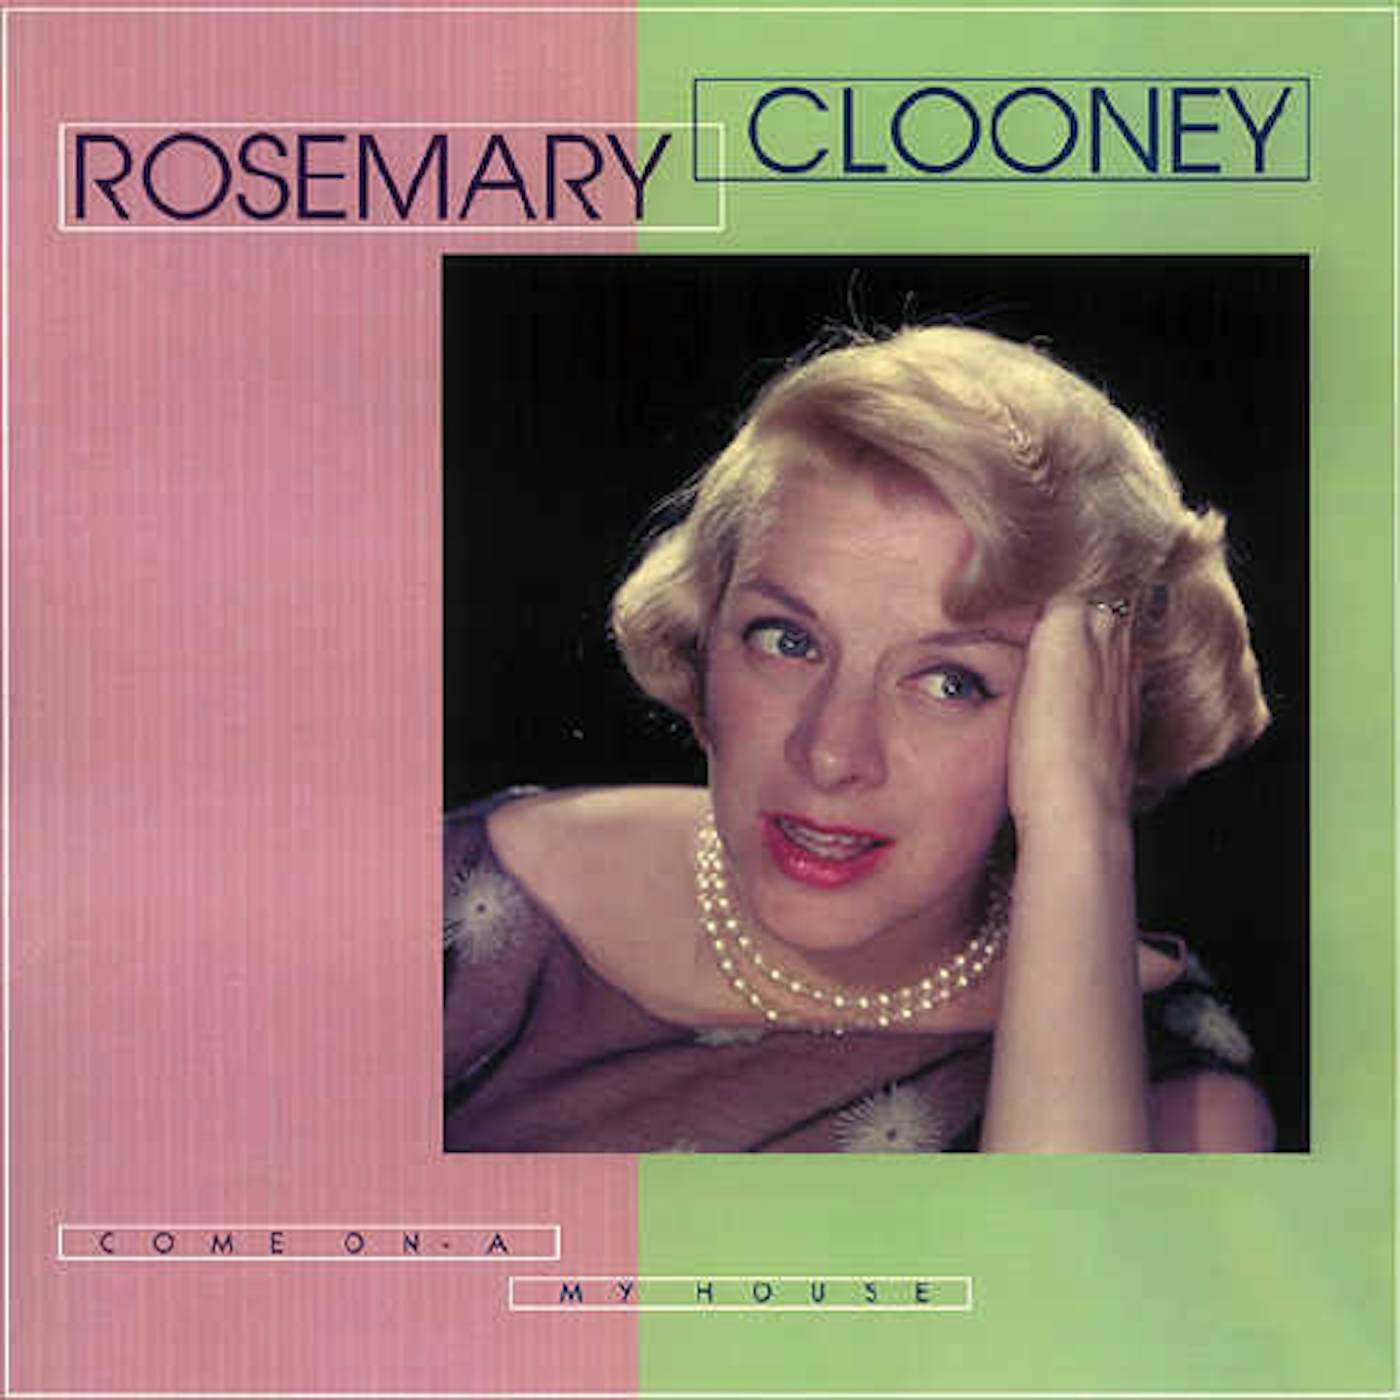 Rosemary Clooney COME ON-A MY HOUSE CD